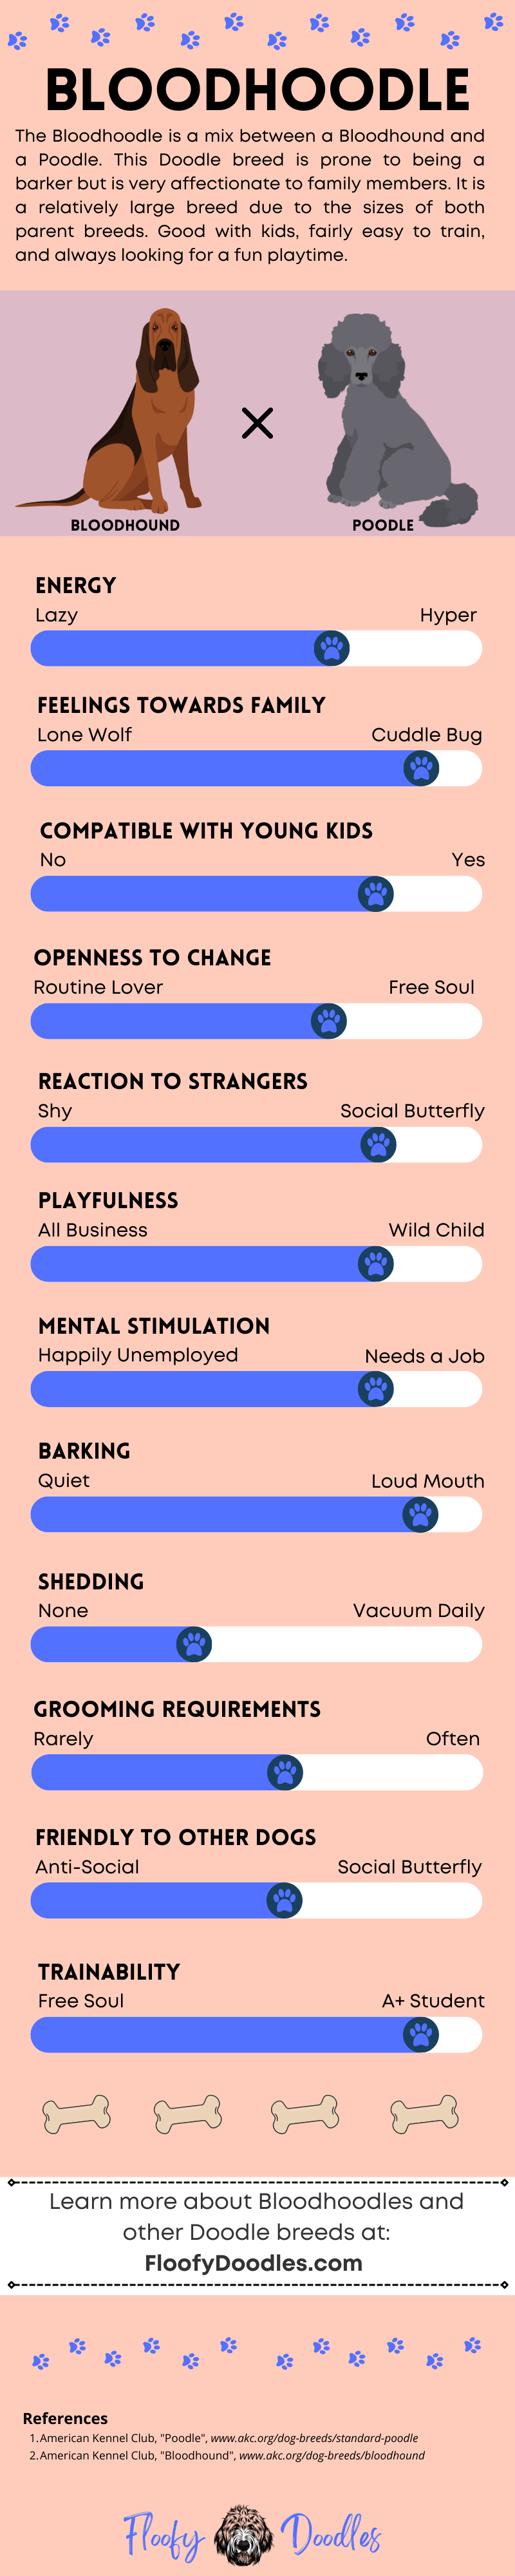 Visual summary of all the traits and characteristics of a bloodhound-poodle mix